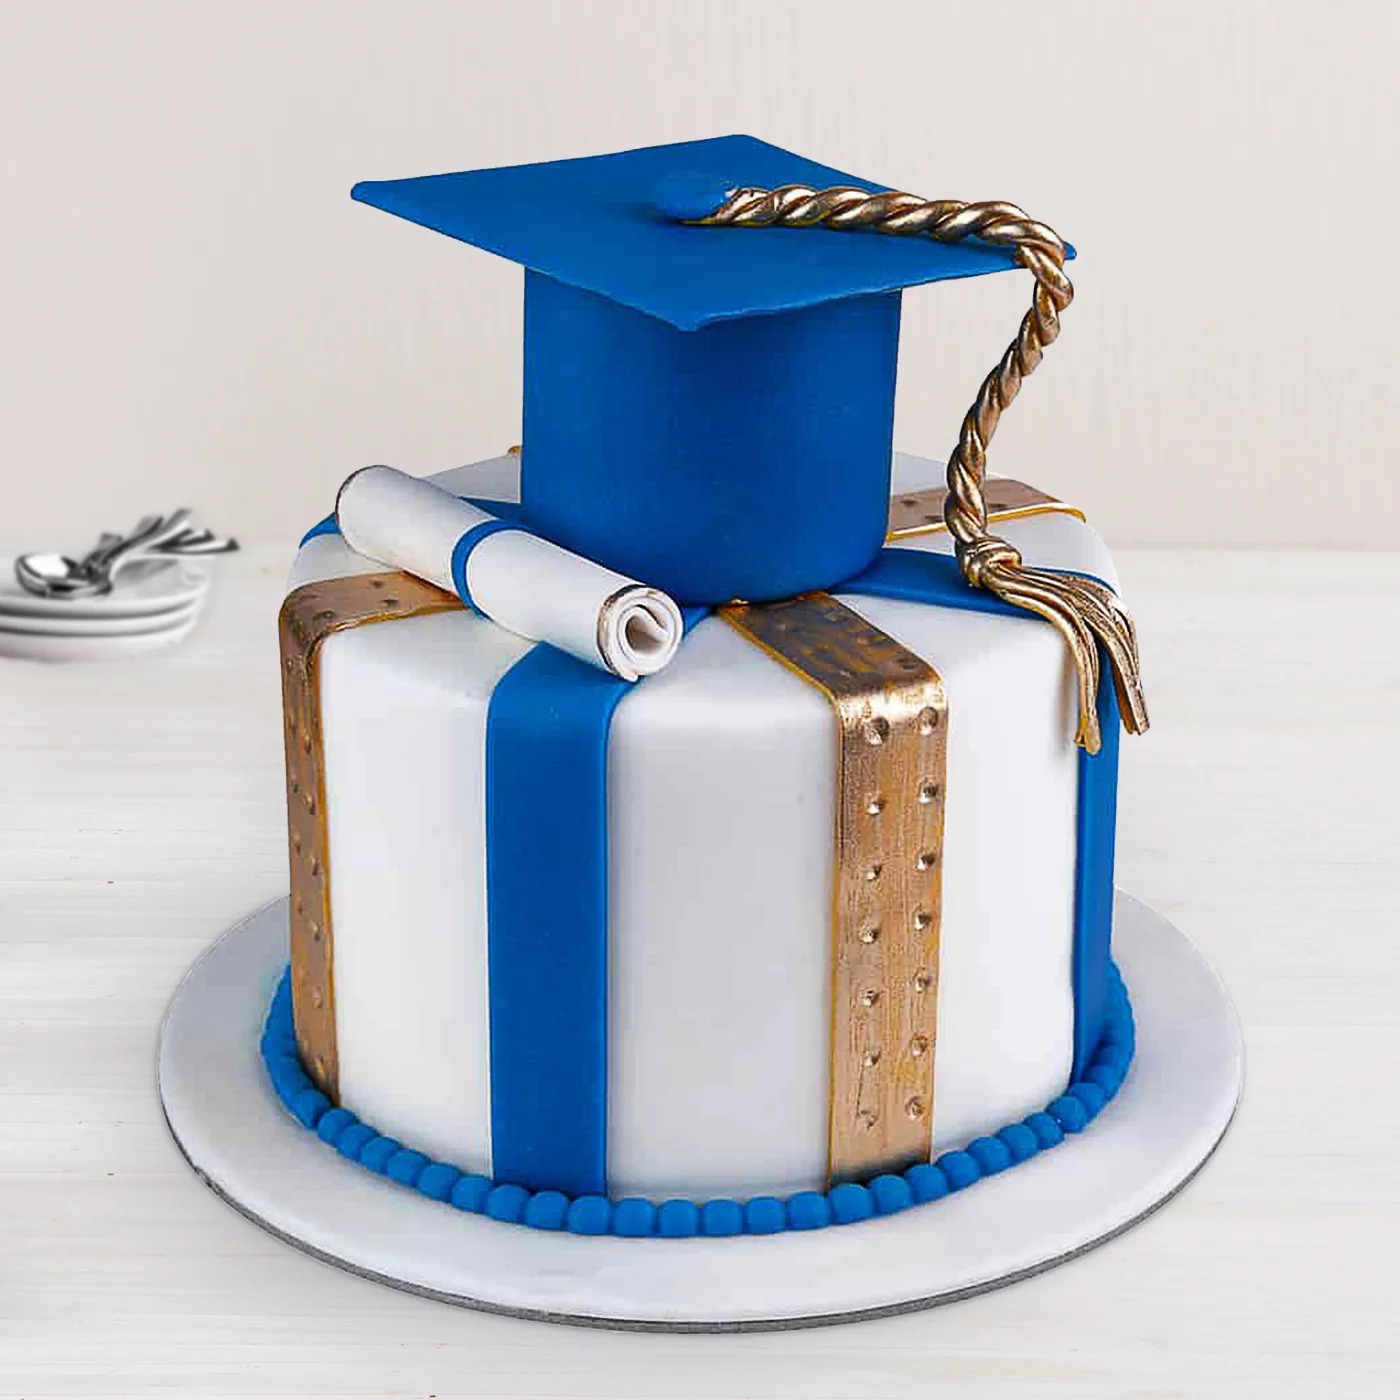 Graduation Cake 112 (covered in white fondant) - Pastries by Randolph